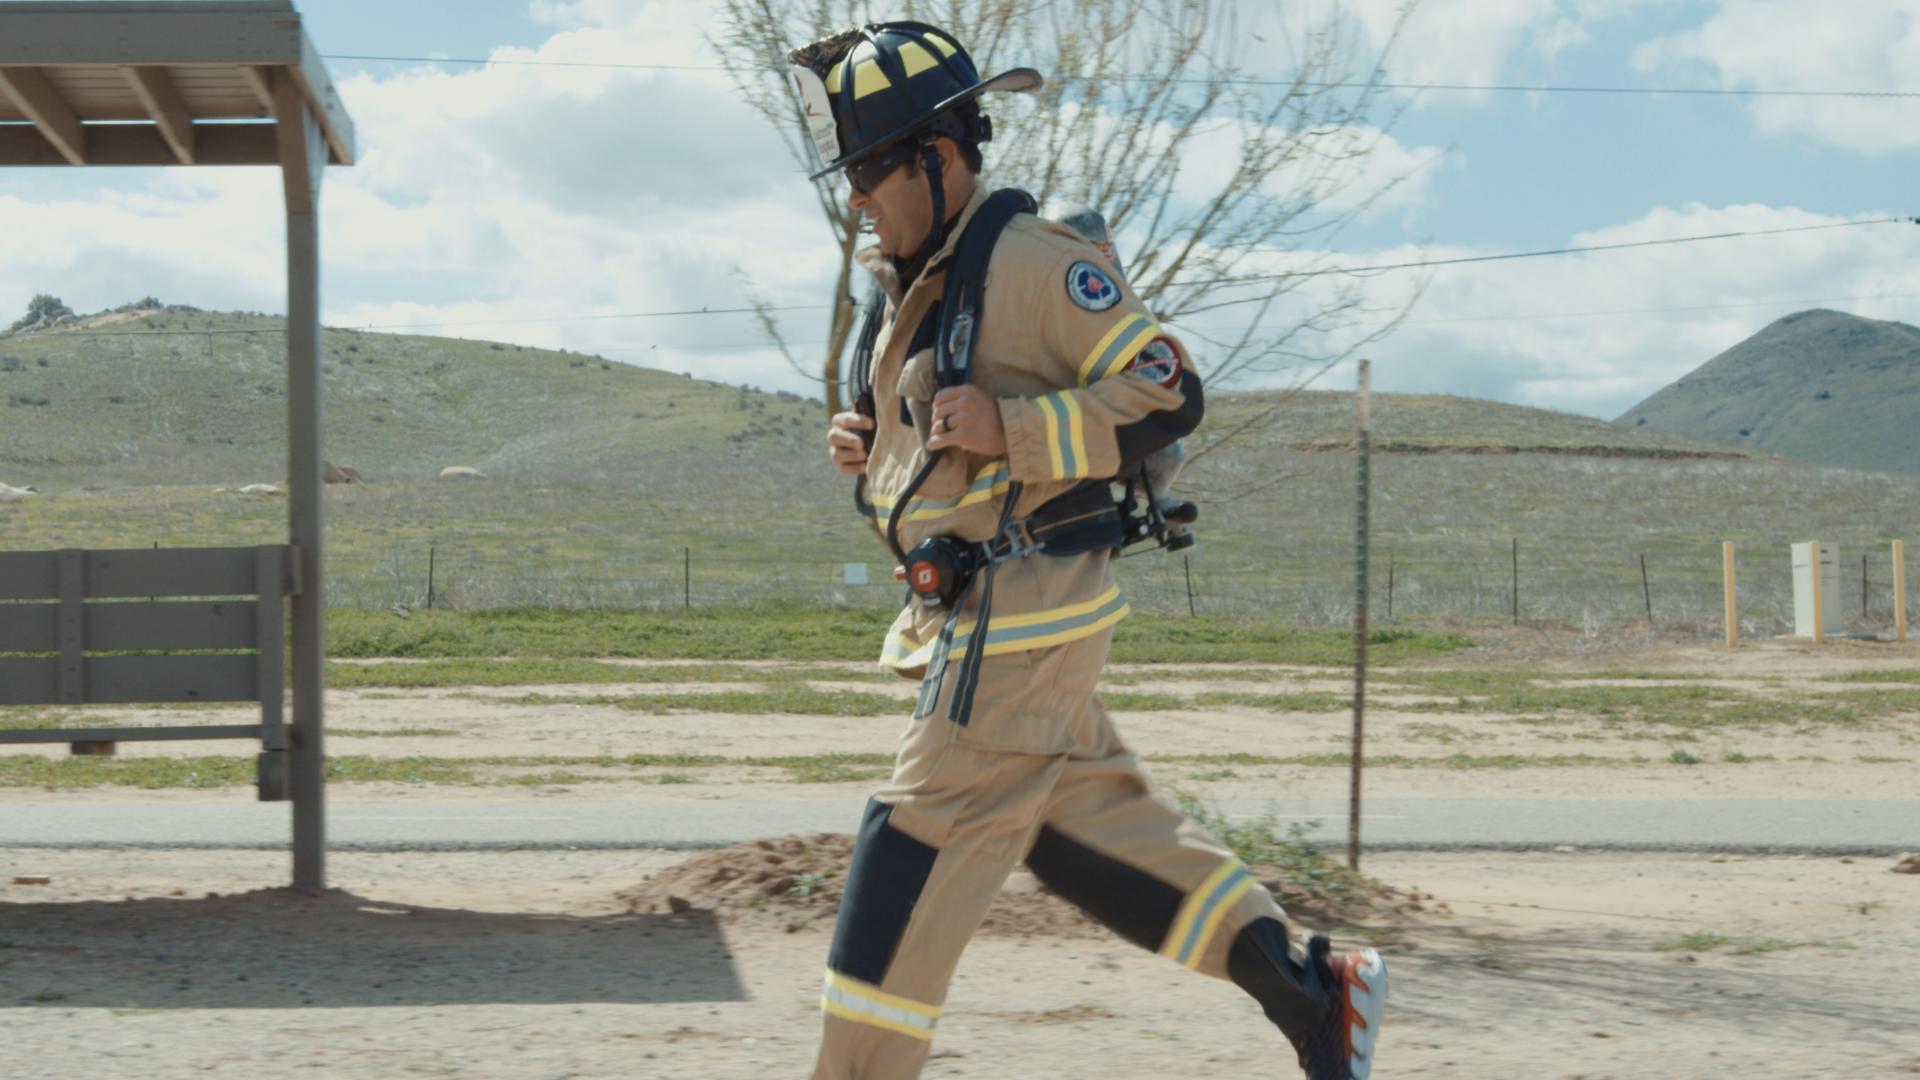 Jose Zambrano running in his firefighter gear.